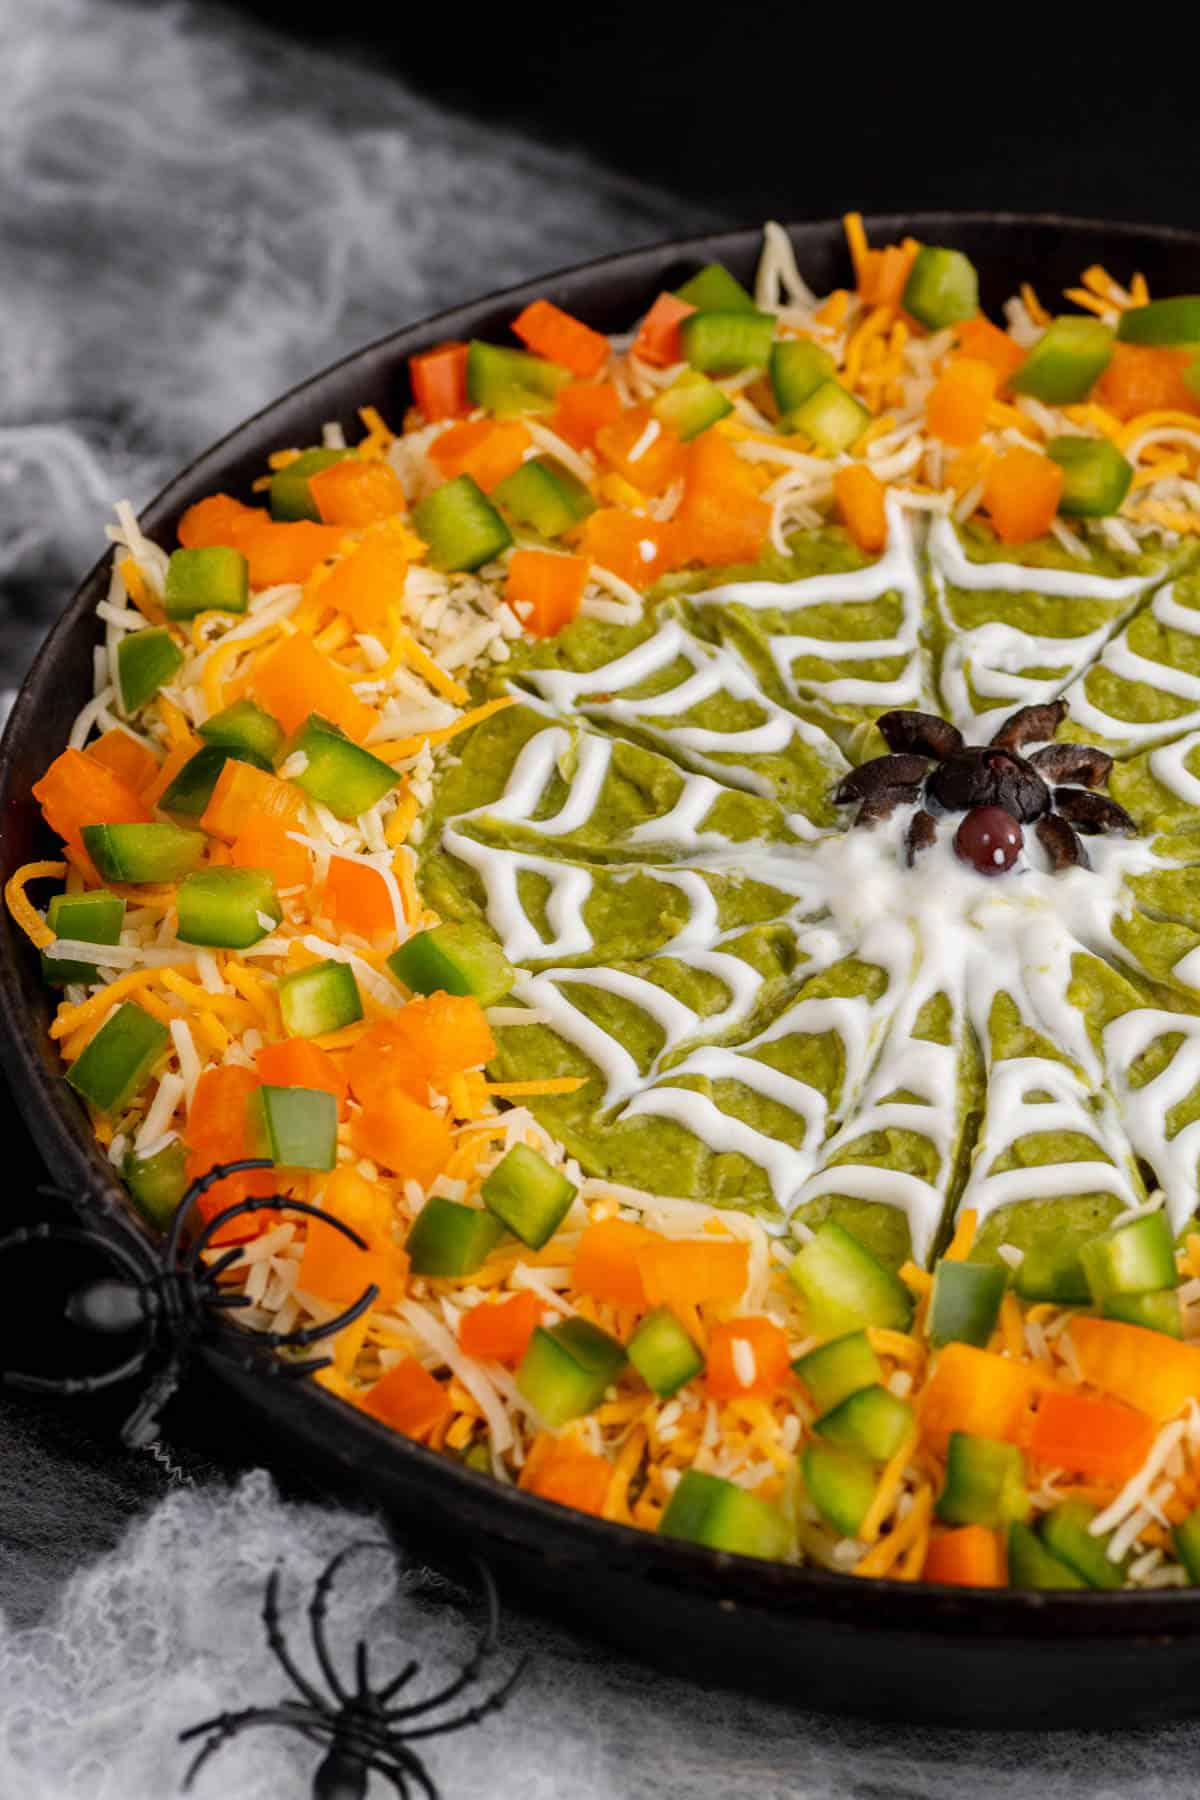 A black bowl containing layered Spider Web Dip decorated with shredded cheese, bell peppers and a sour cream spider web and spiders.